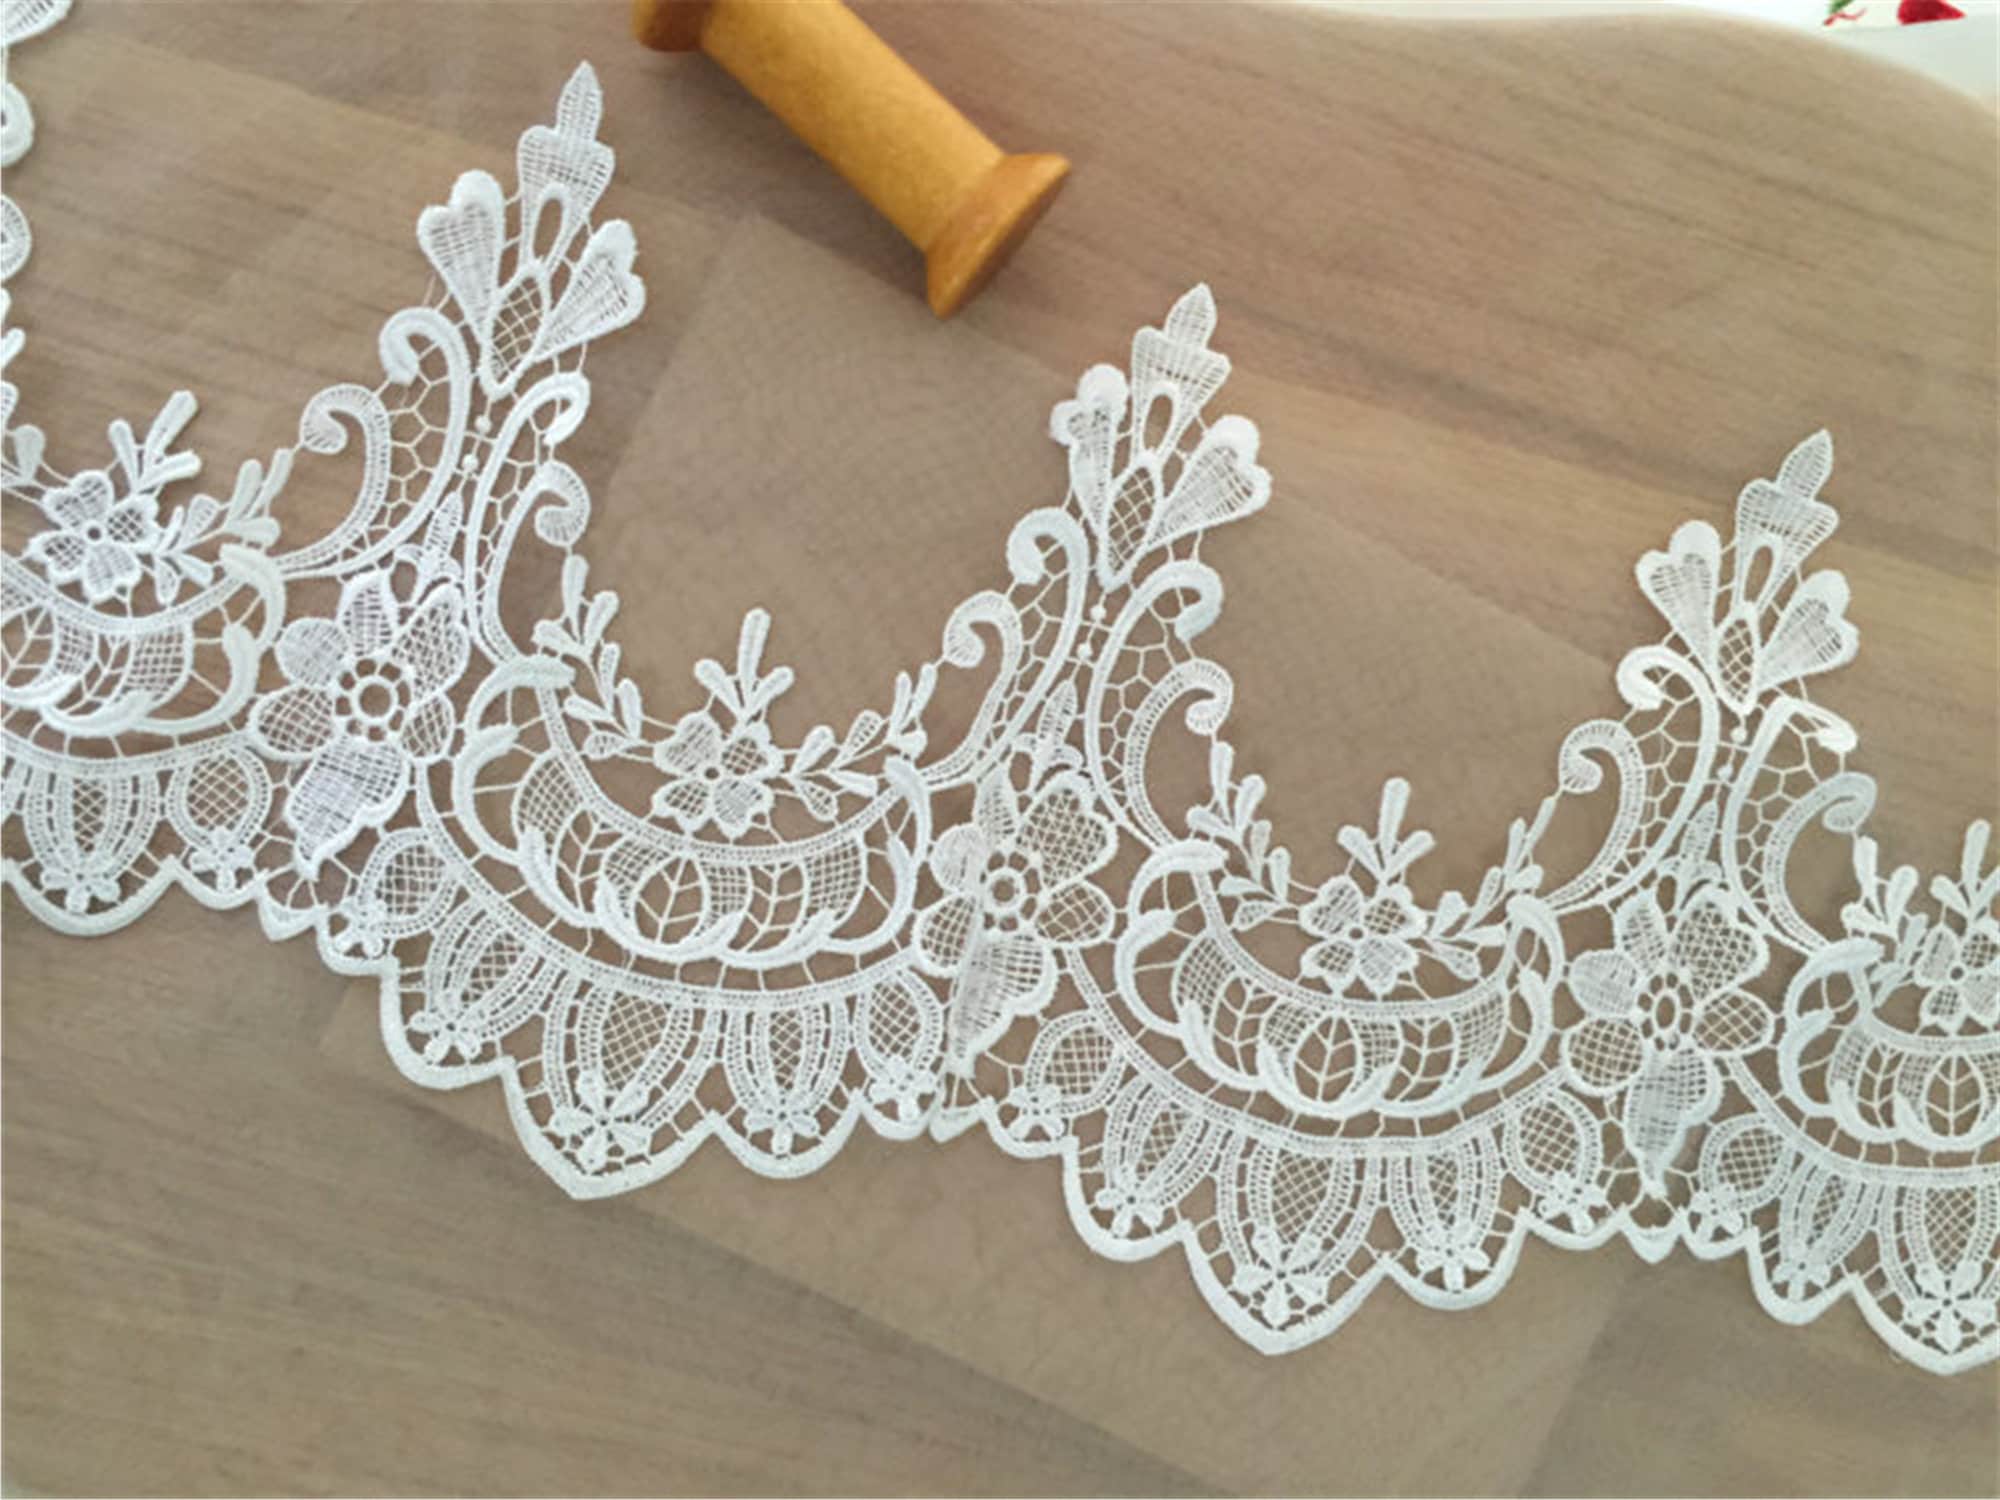 Guipure Lace Trim: Guipure Trimmings from Austria by HOH, SKU 00044940 at  $51 — Buy Luxury Fabrics Online